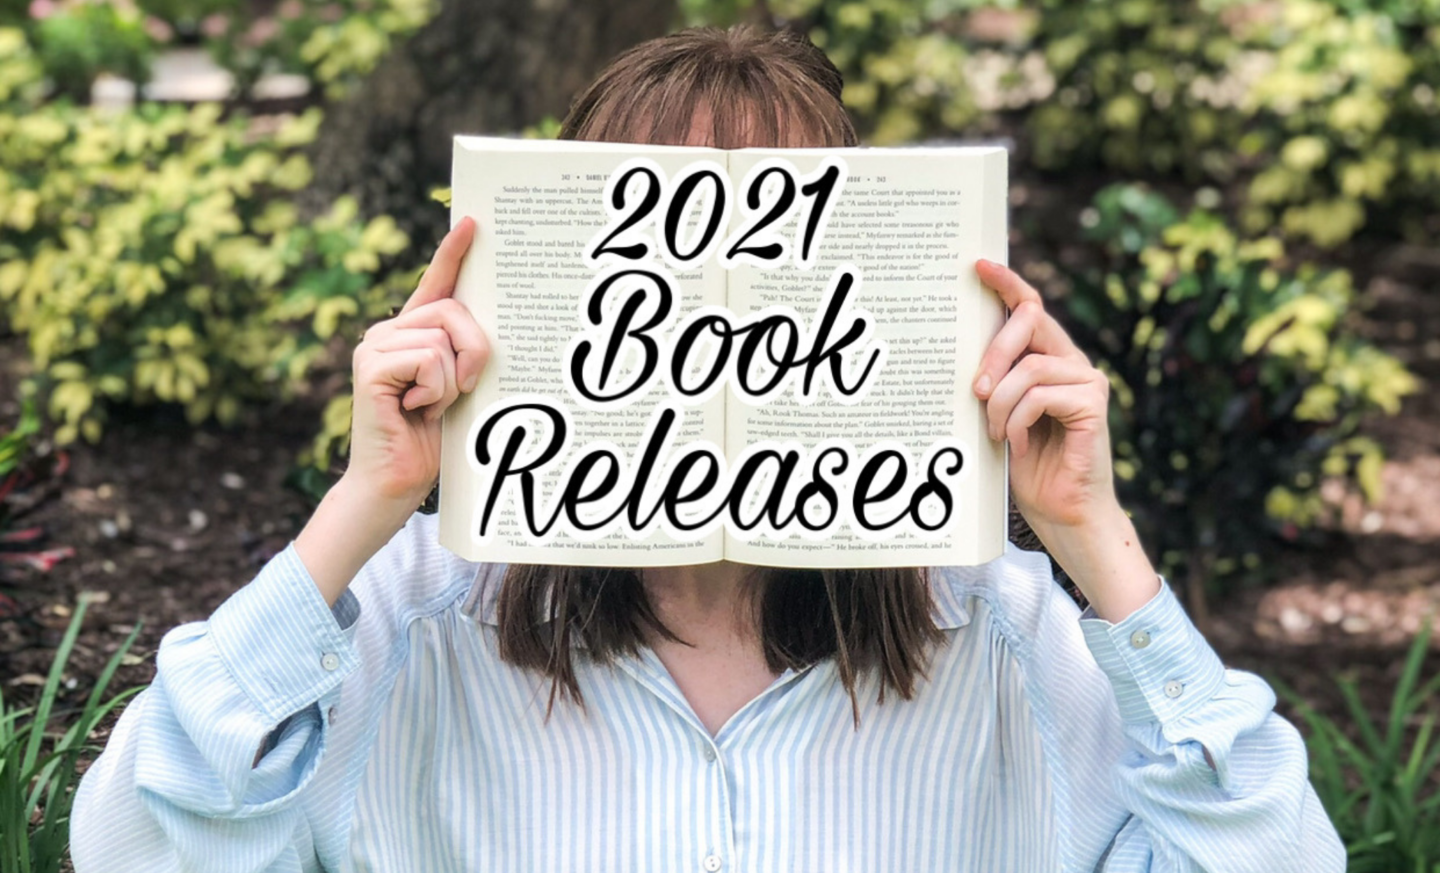 Books coming out 2021 - Just Like Gilmore Girls